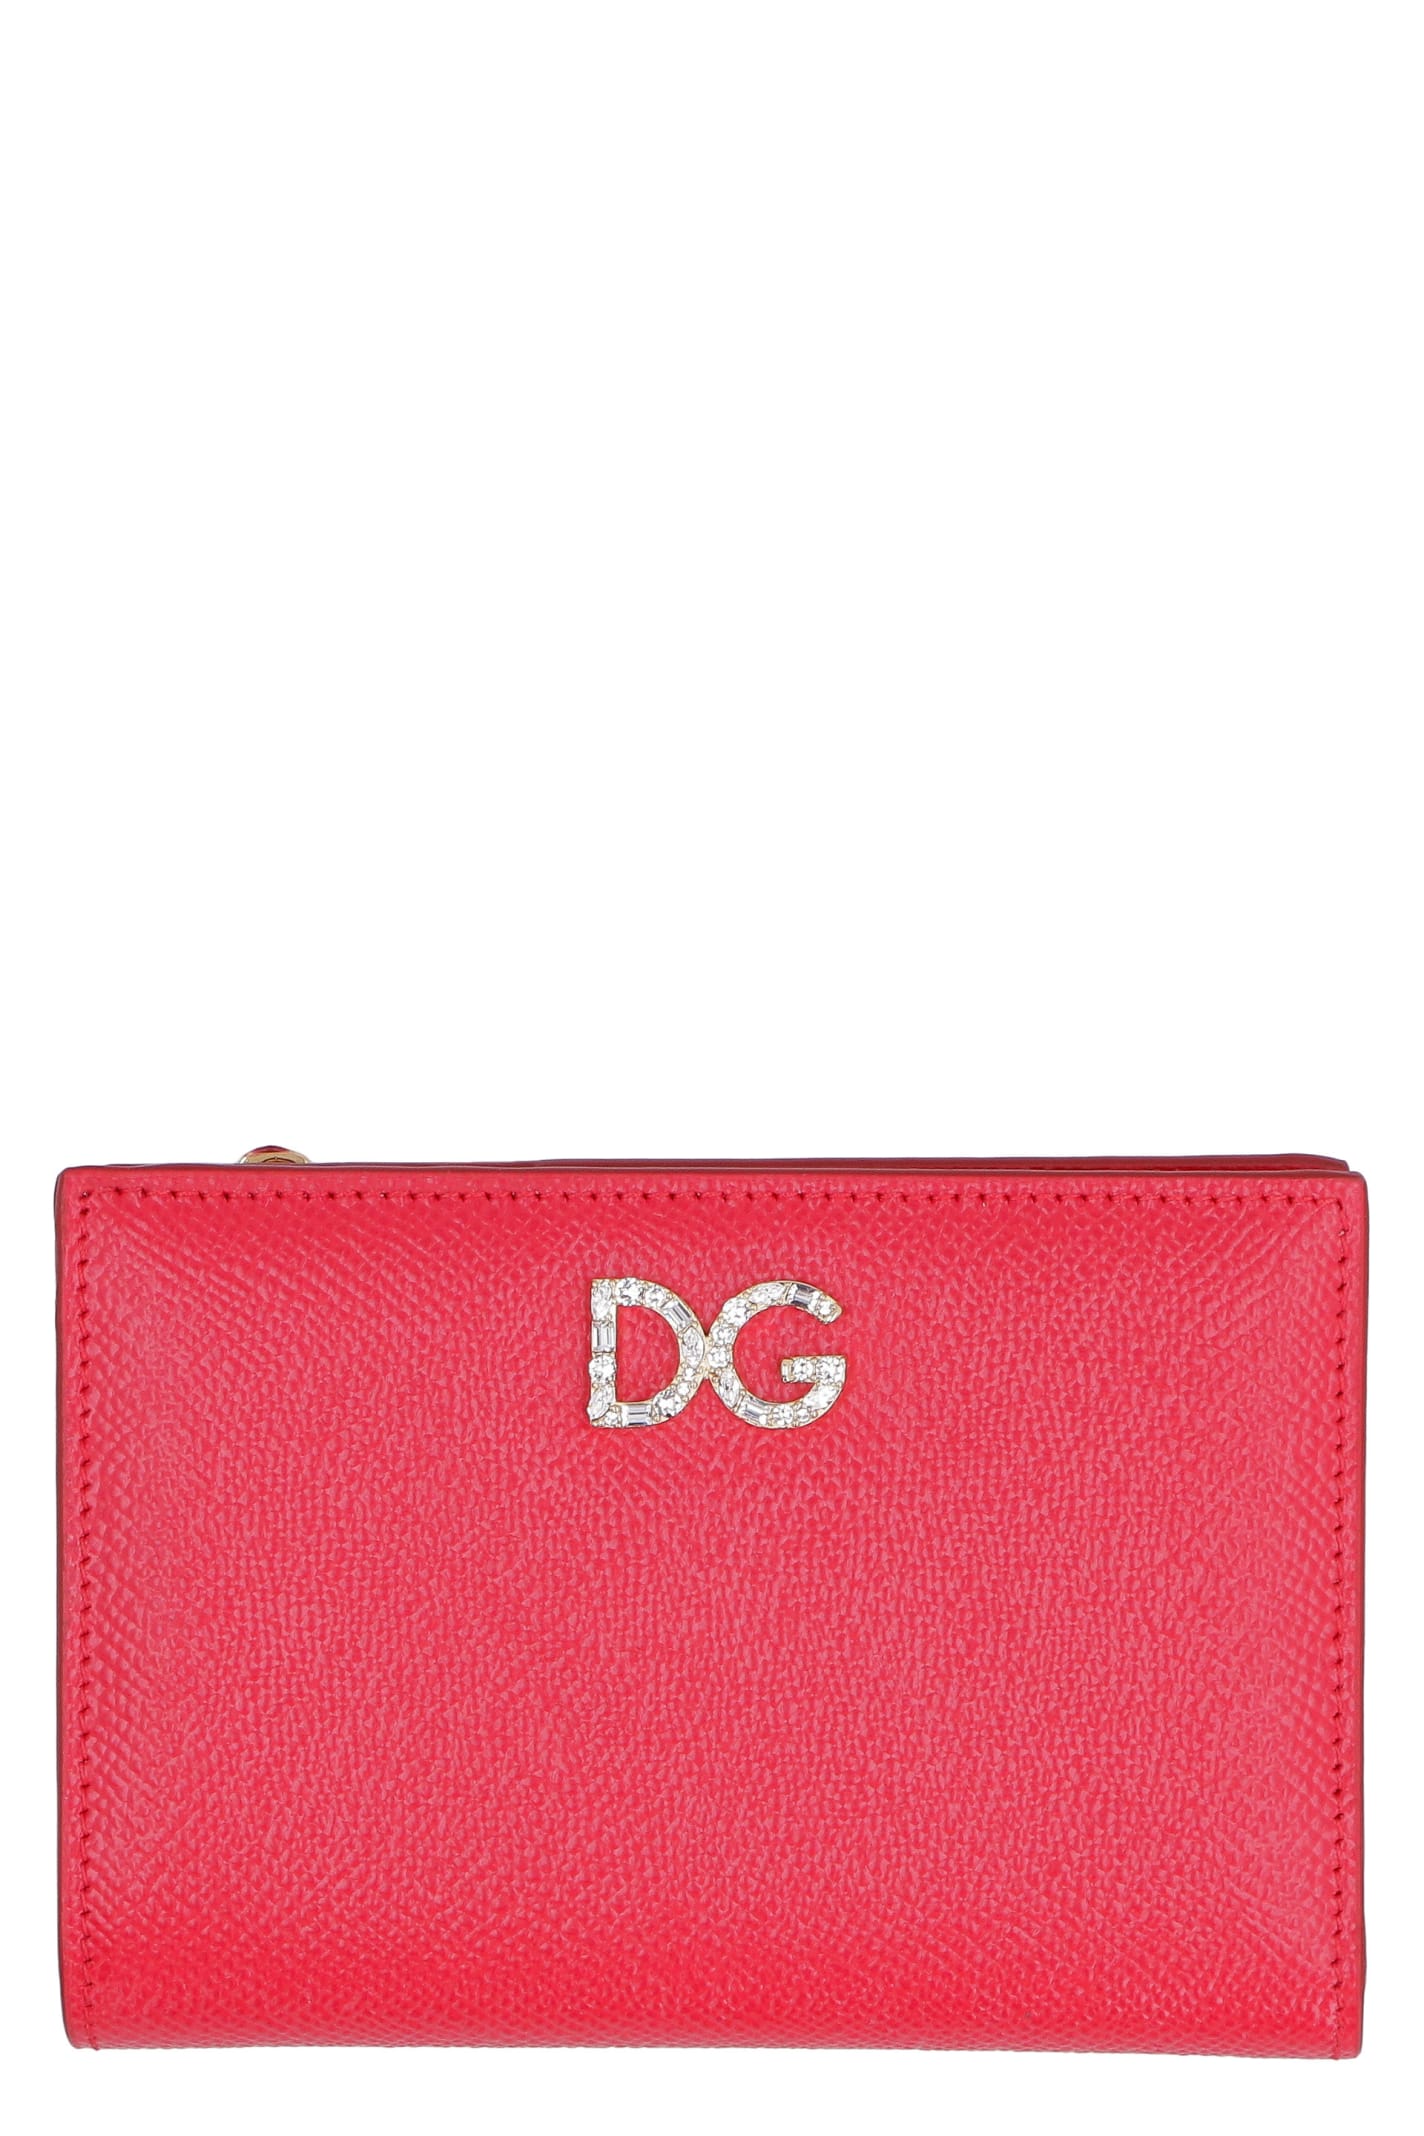 Dolce & Gabbana Small Leather Flap-over Wallet